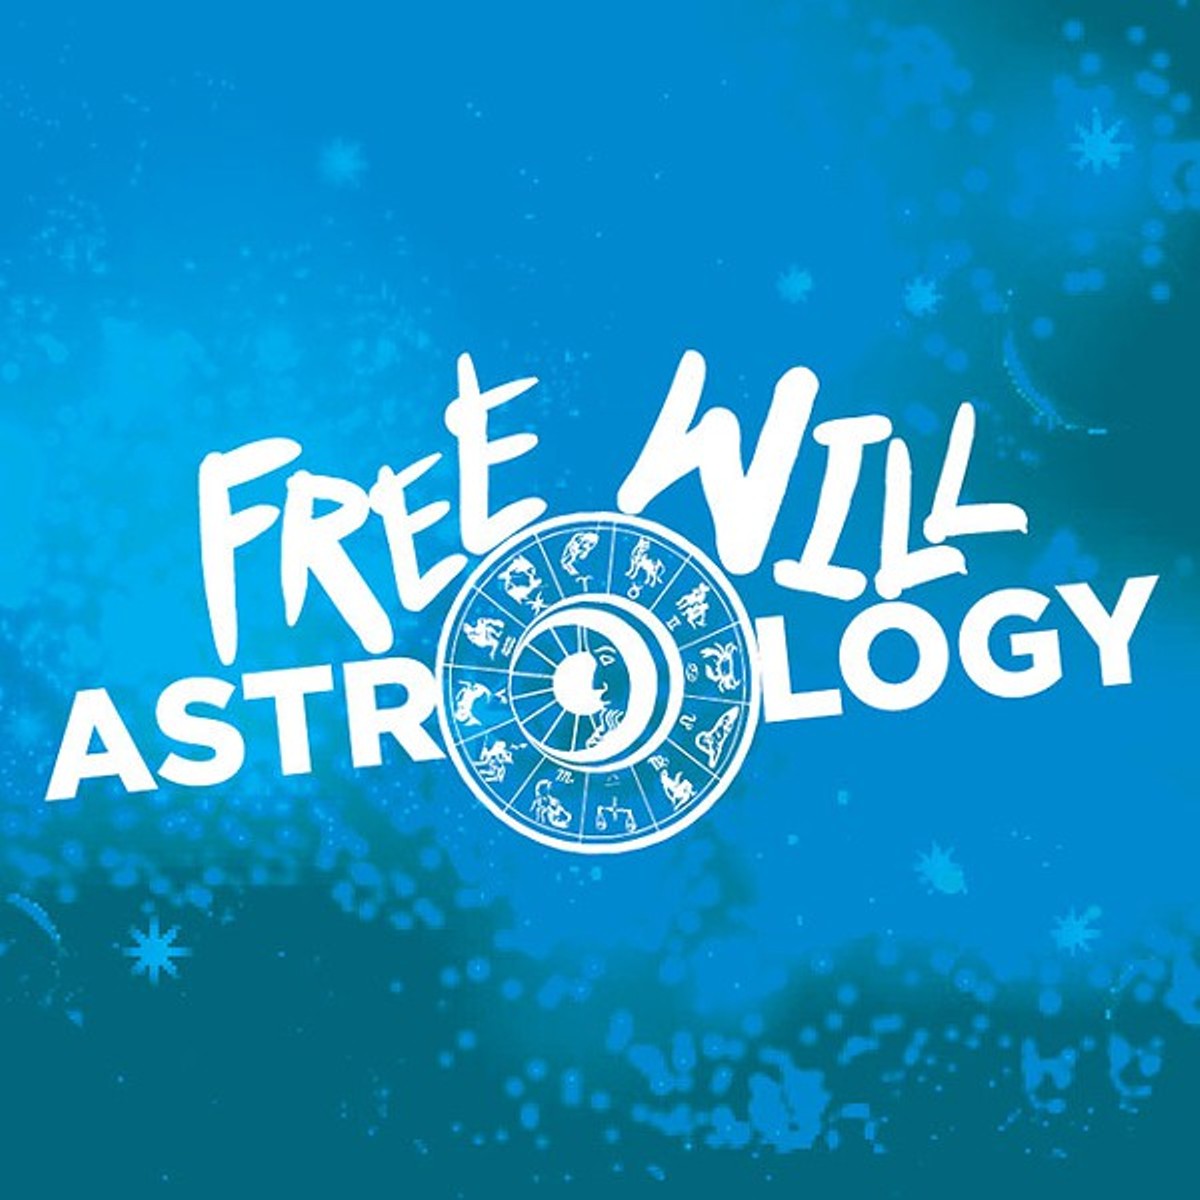 Free Will Astrology (6-10-15)